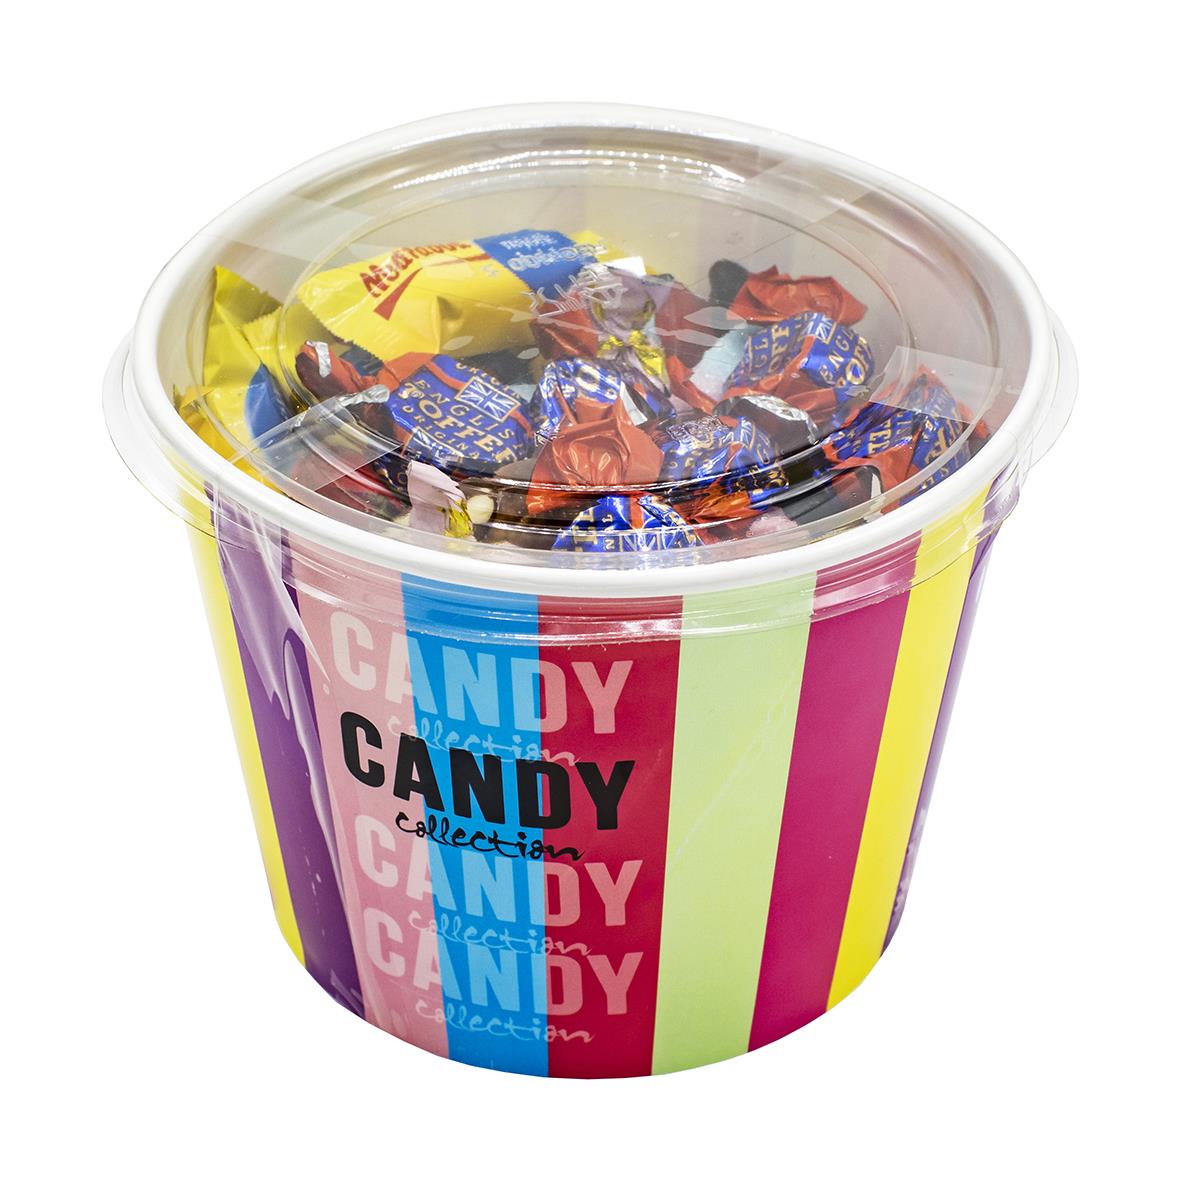 Godis Candy Collection 800g